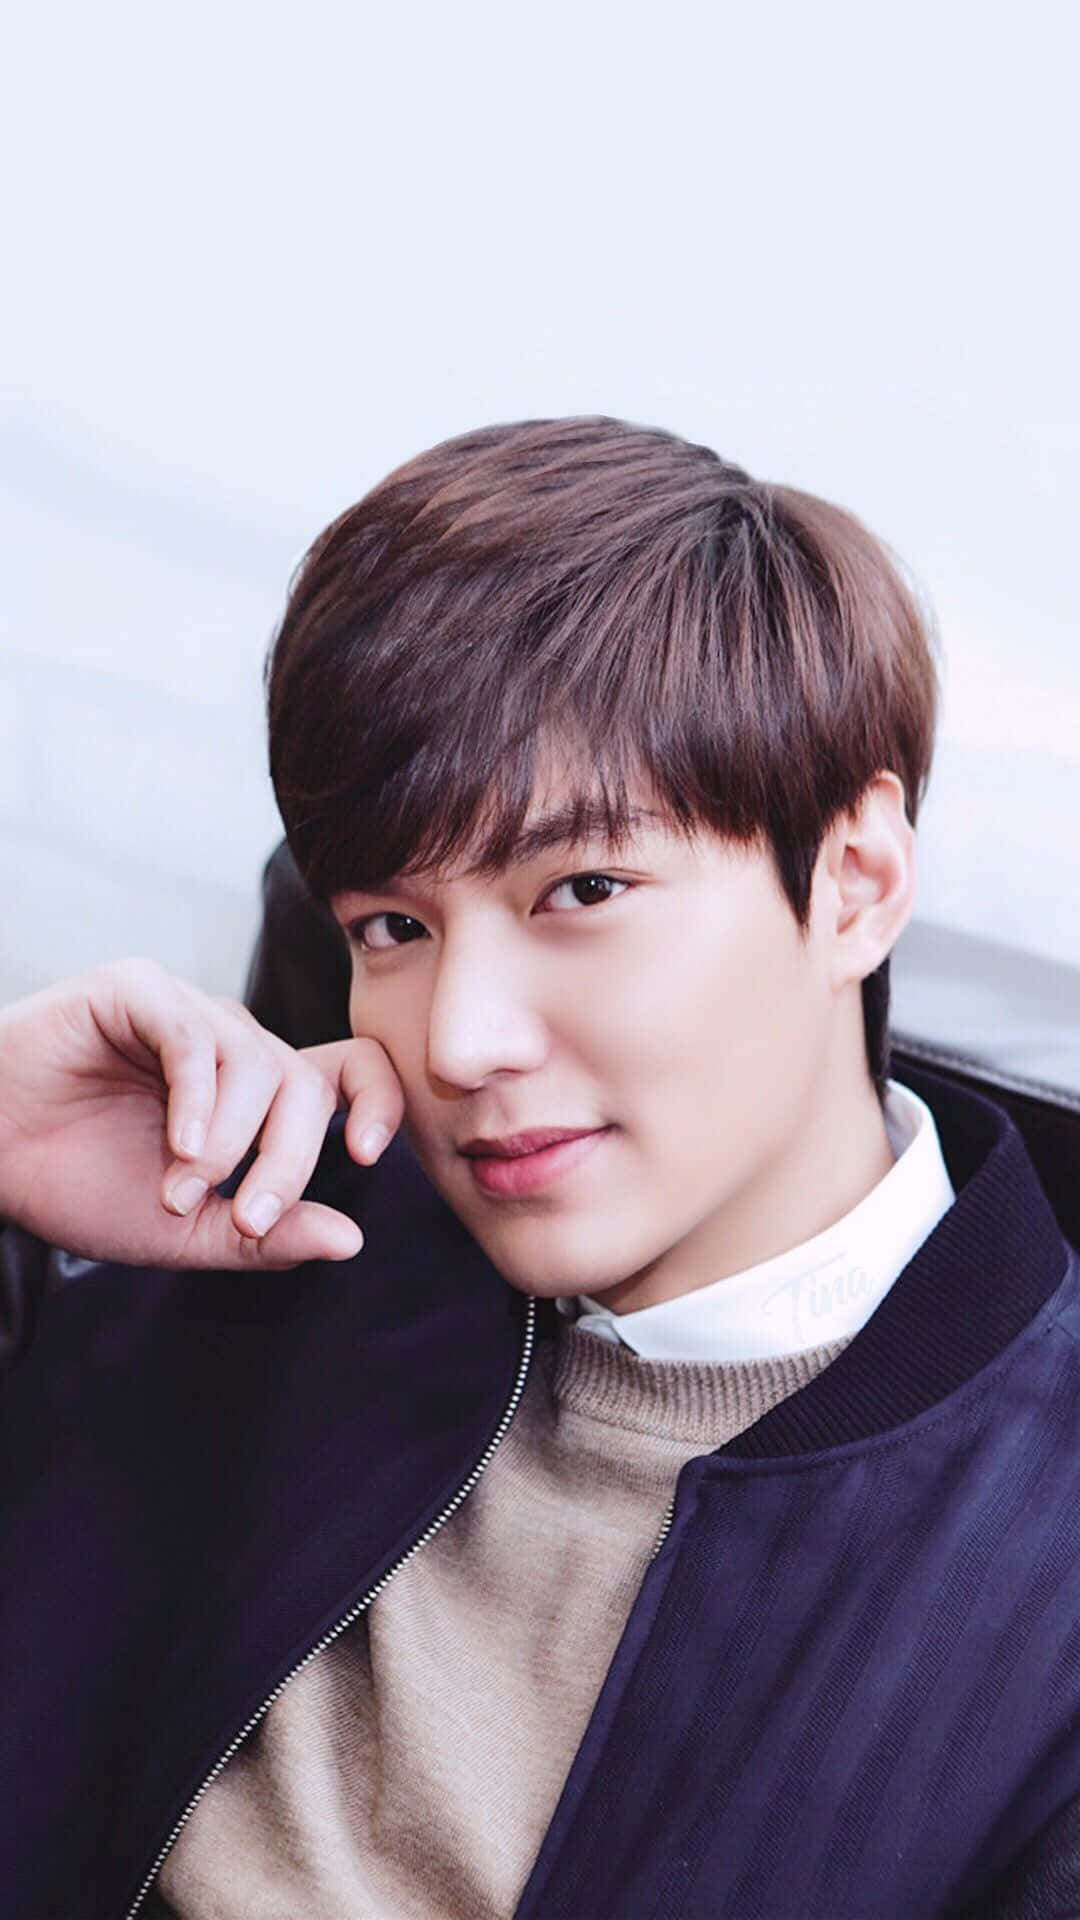 South Korean Star Lee Min Ho Majestically Posing For A Photoshoot